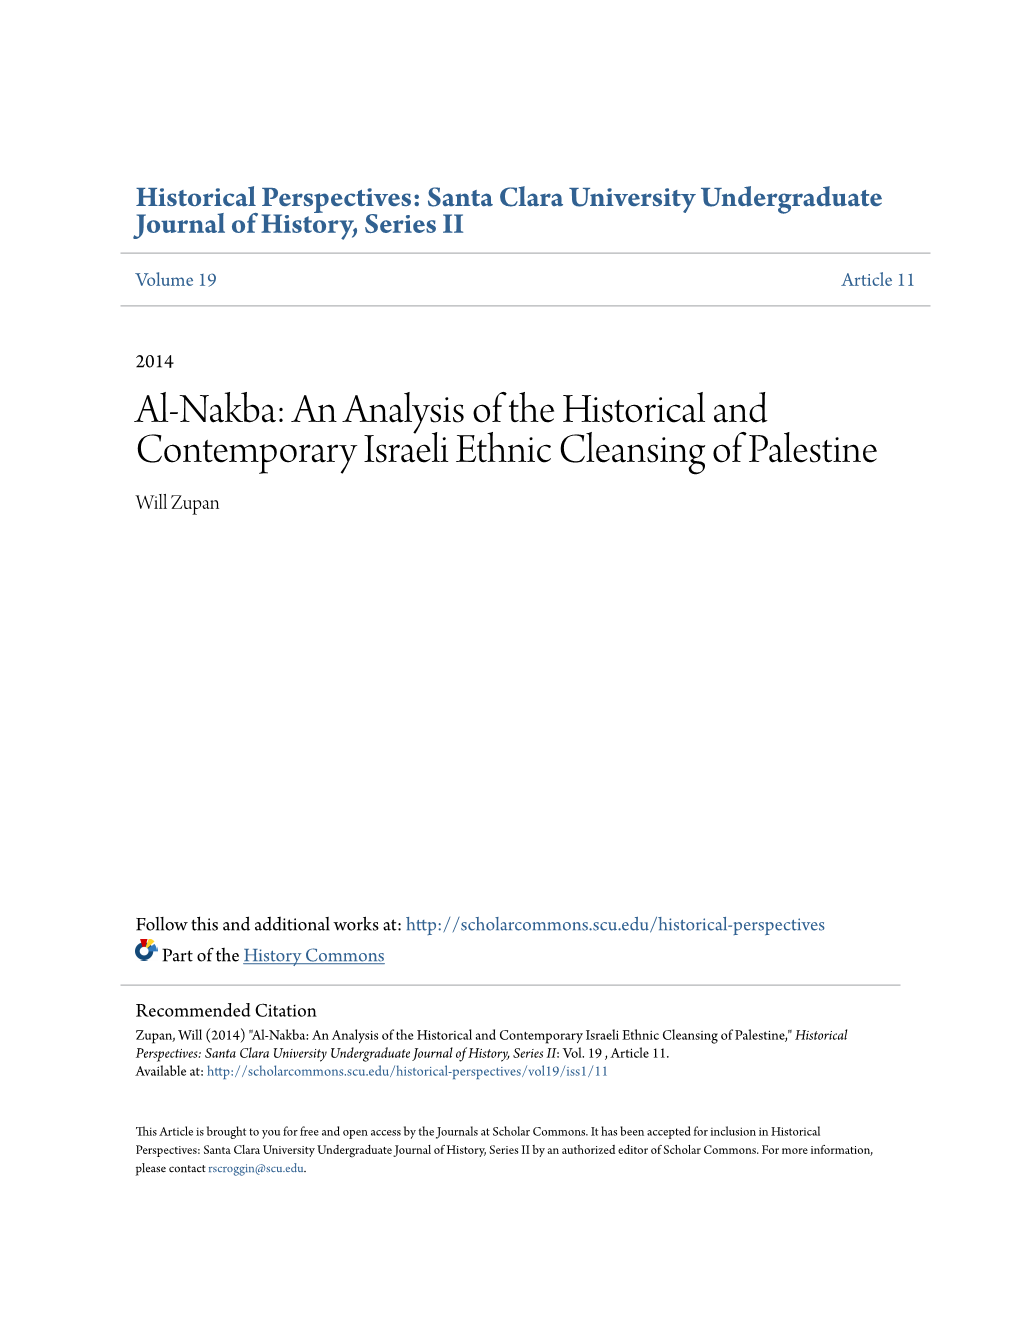 Al-Nakba: an Analysis of the Historical and Contemporary Israeli Ethnic Cleansing of Palestine Will Zupan